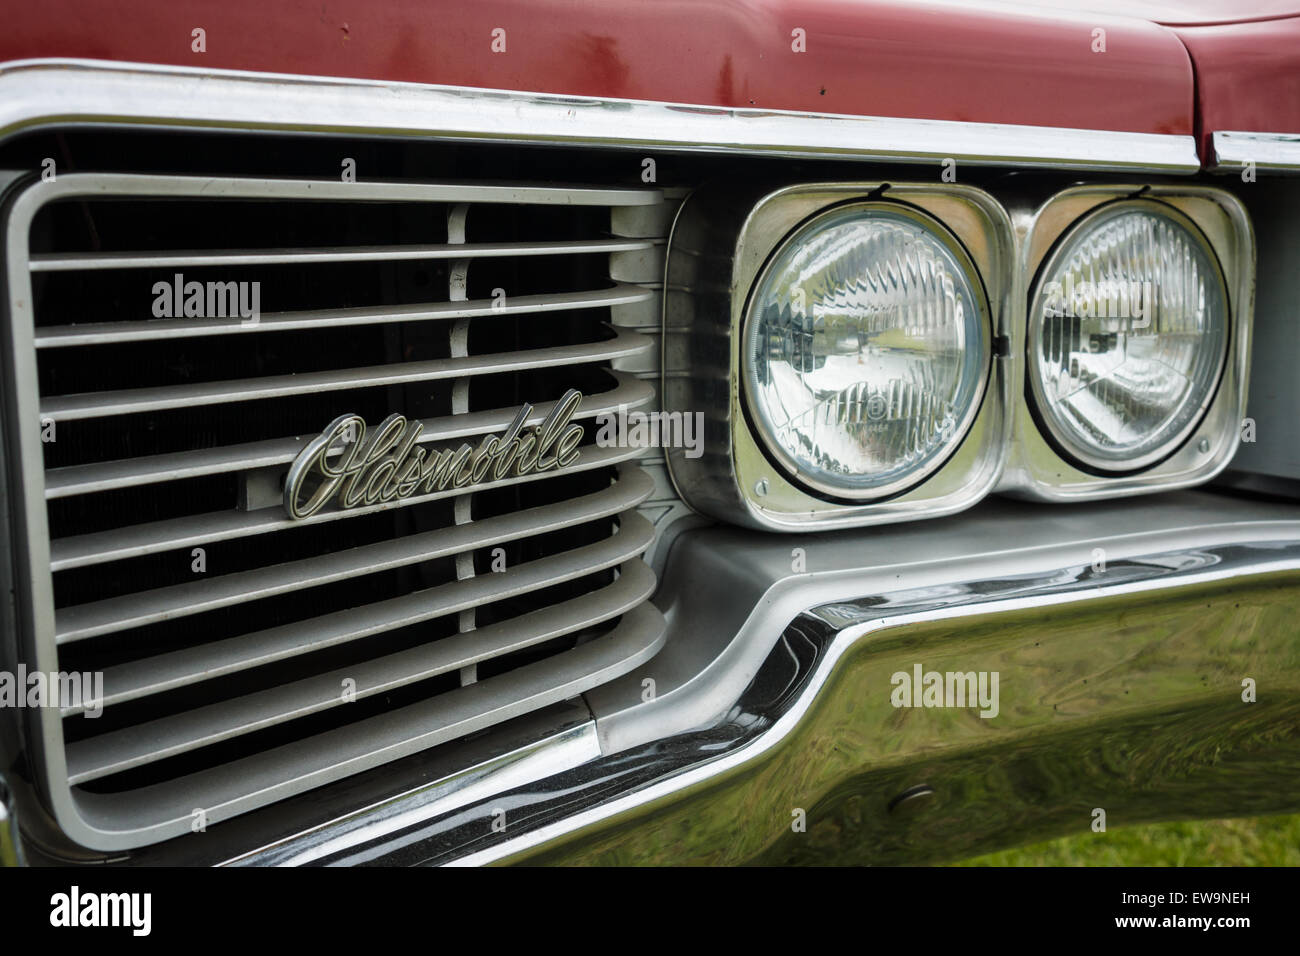 PAAREN IM GLIEN, GERMANY - MAY 23, 2015: Fragment of a full-size car Oldsmobile 88 Delmont, 1968. The oldtimer show in MAFZ. Stock Photo